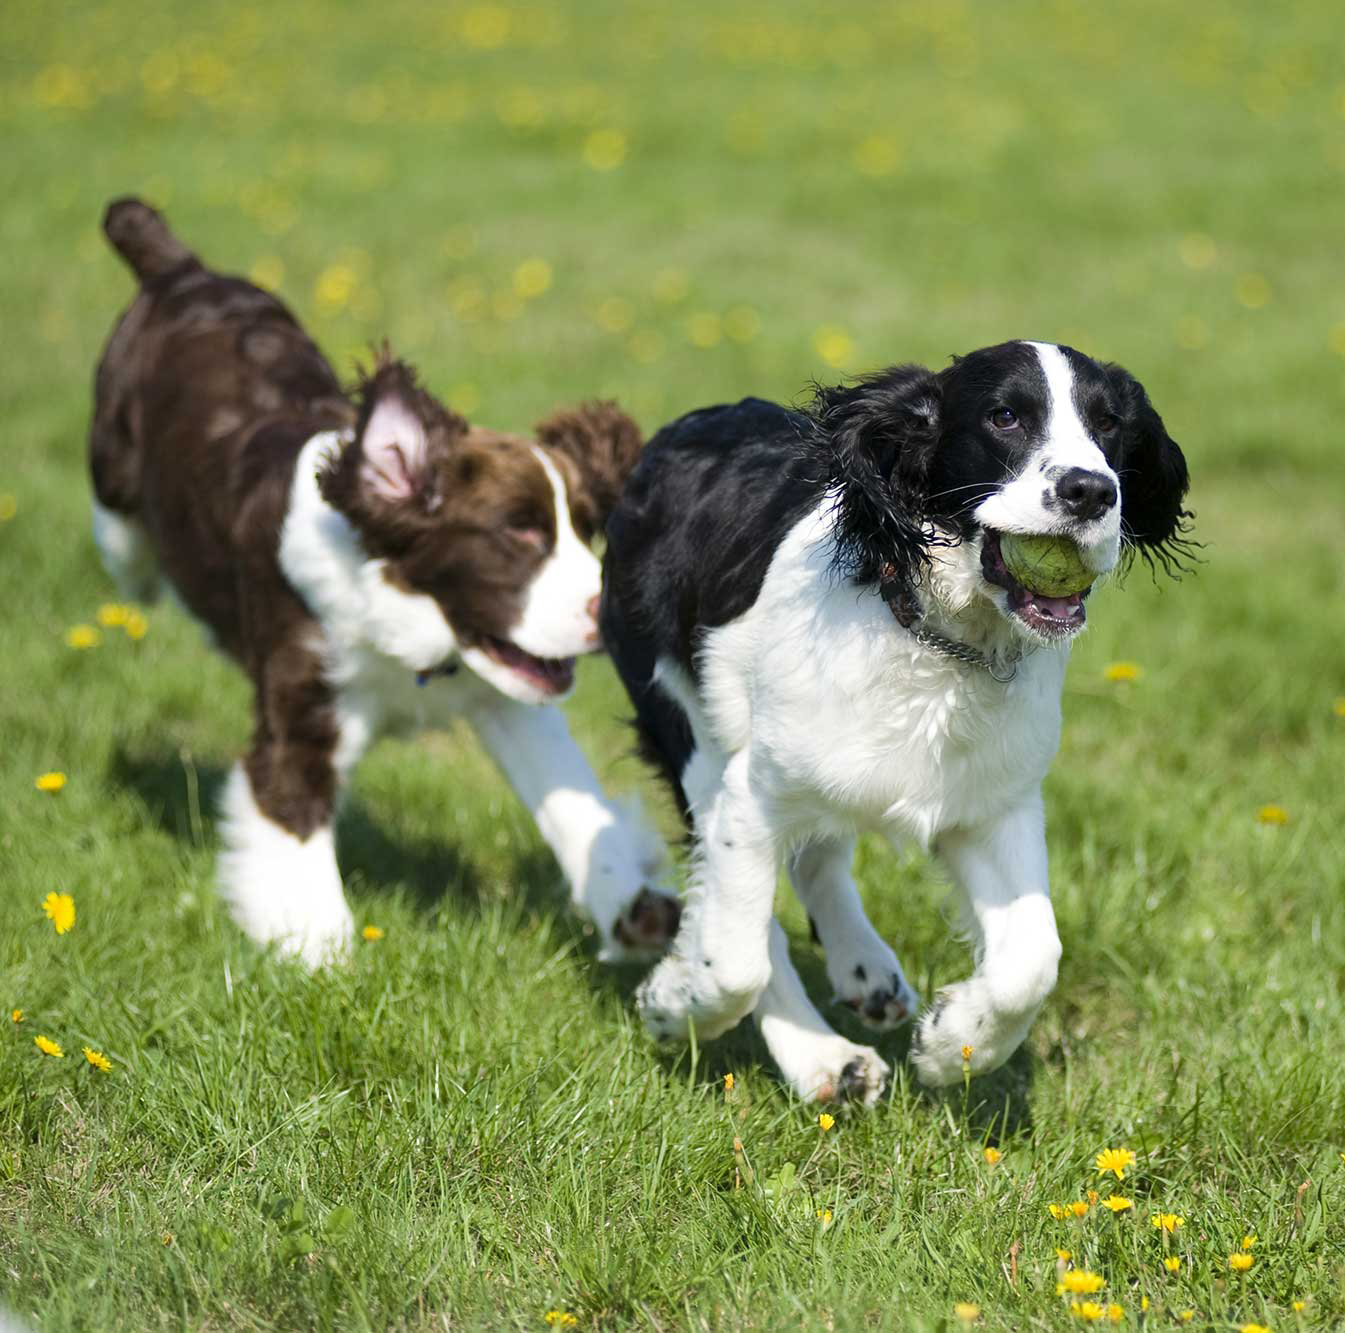 Two Dogs Playing and Running